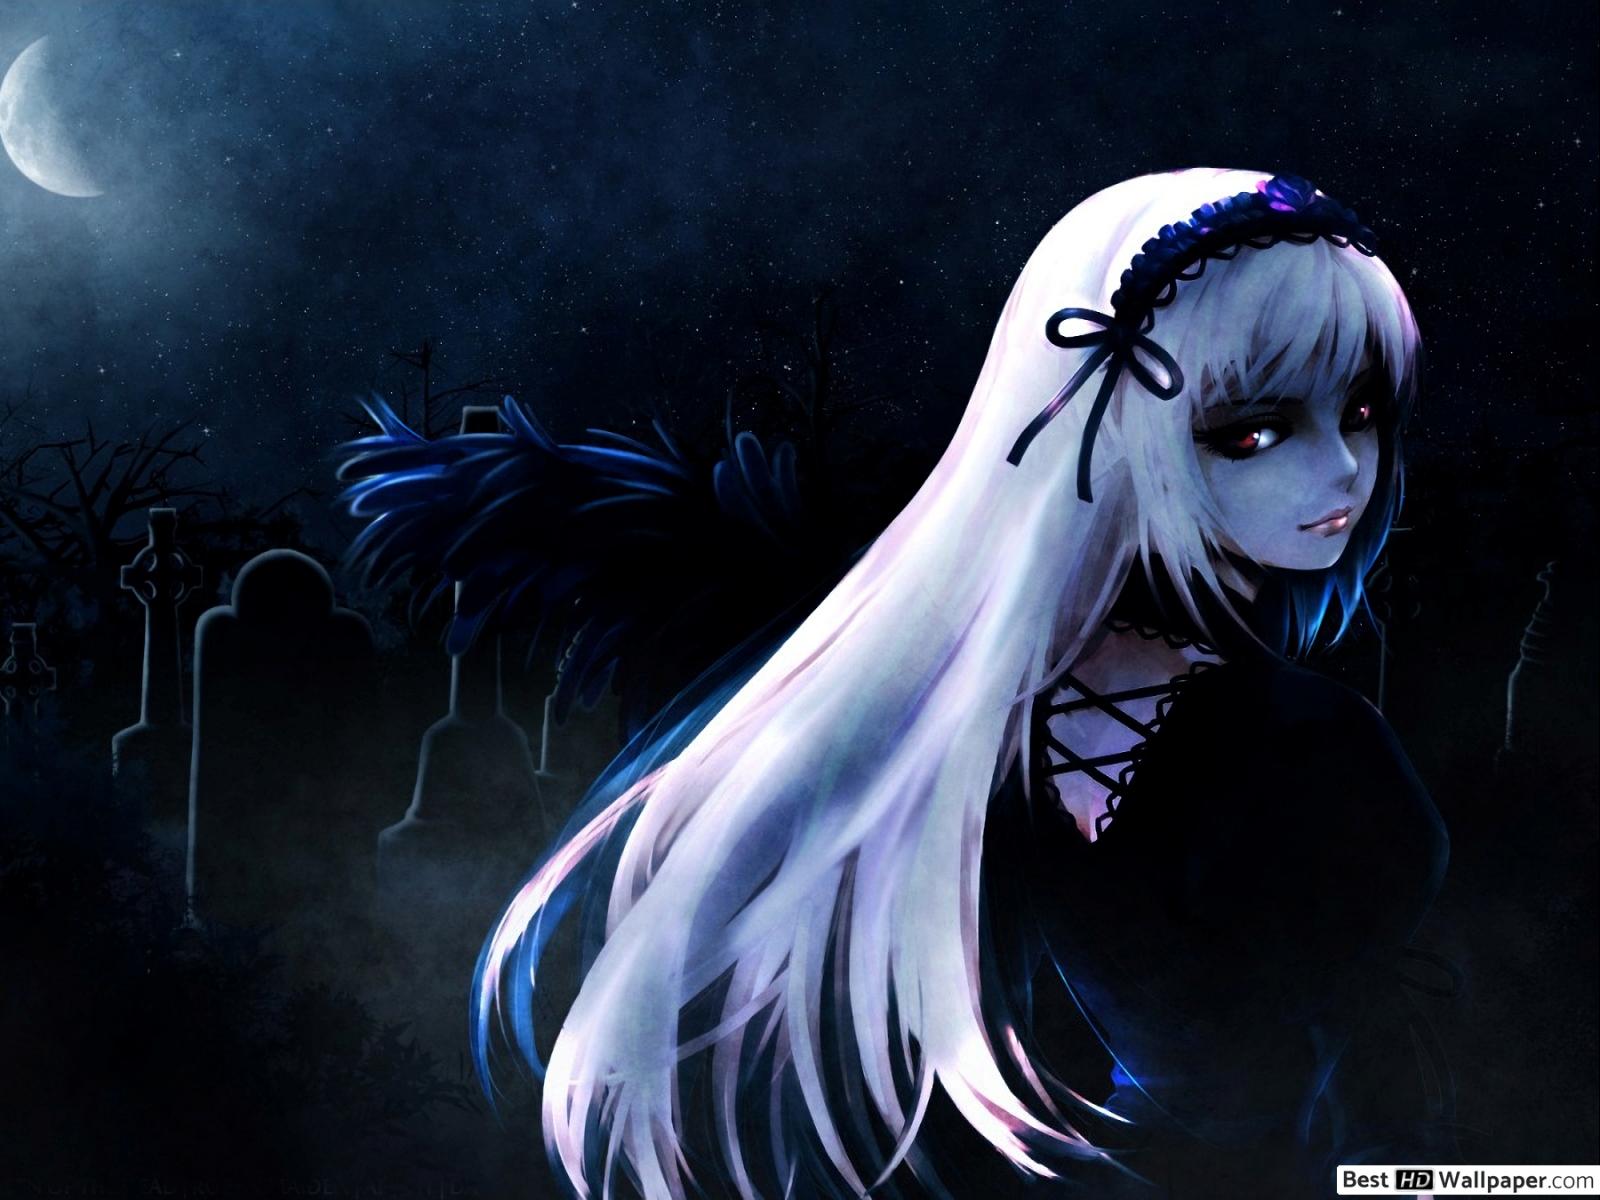 Gothic Anime Girl HD wallpaper download